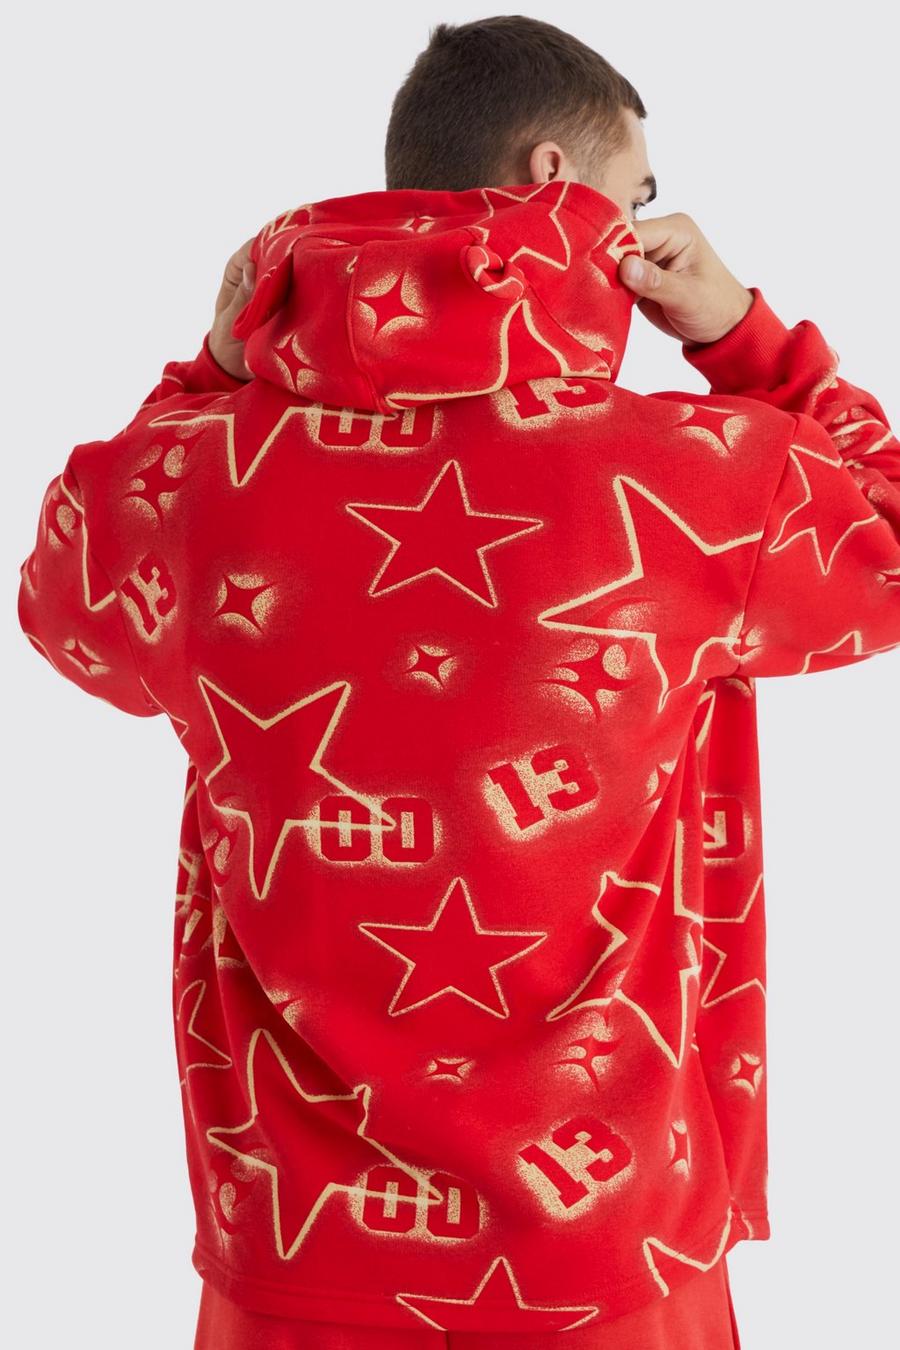 Red Oversized All Over Graffiti Ear Hoodie